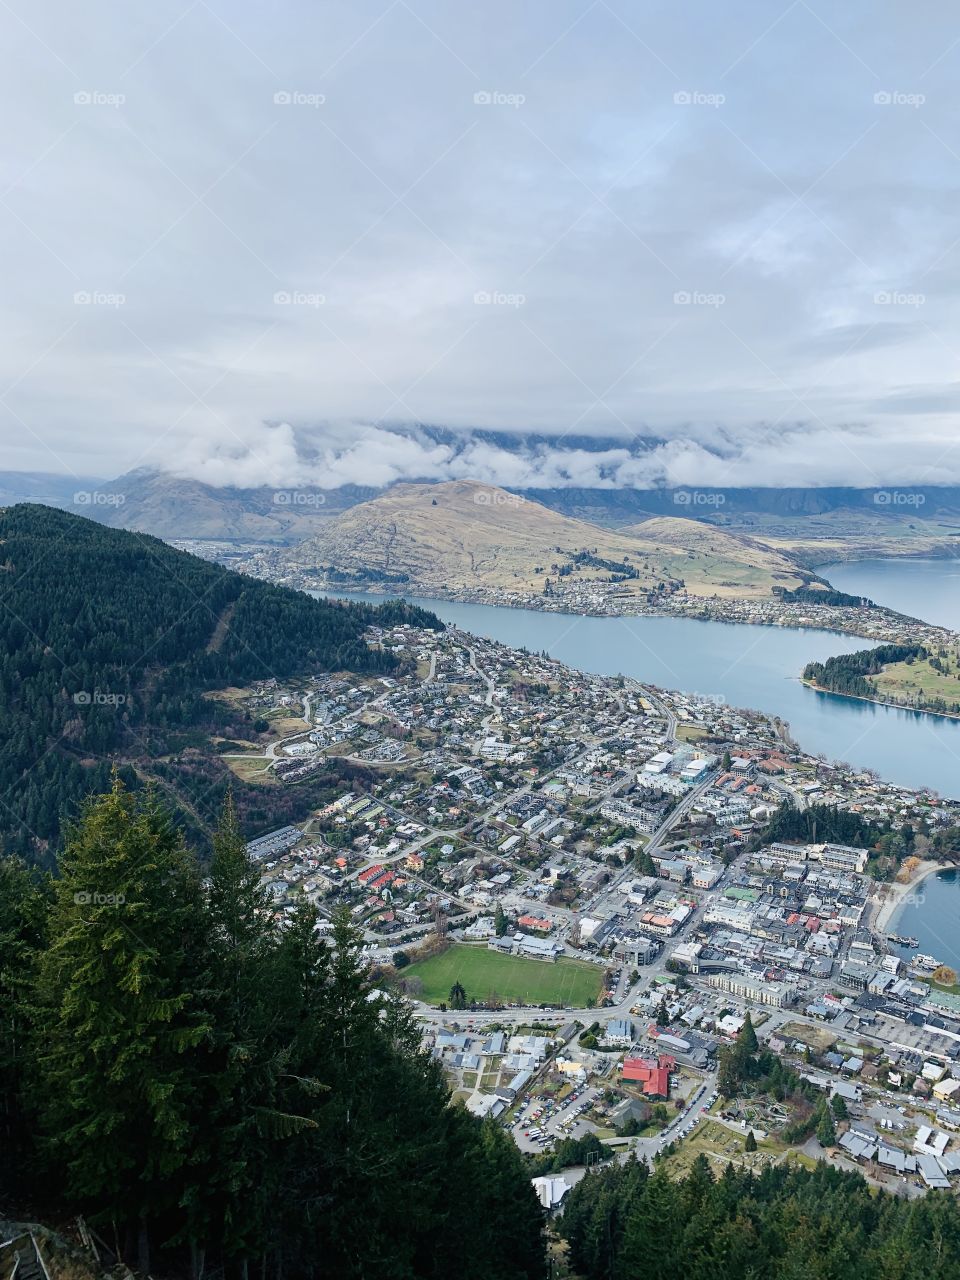 Queenstown, New Zealand viewed from The Skyline. A cold but beautiful sunny afternoon up on the mountain.